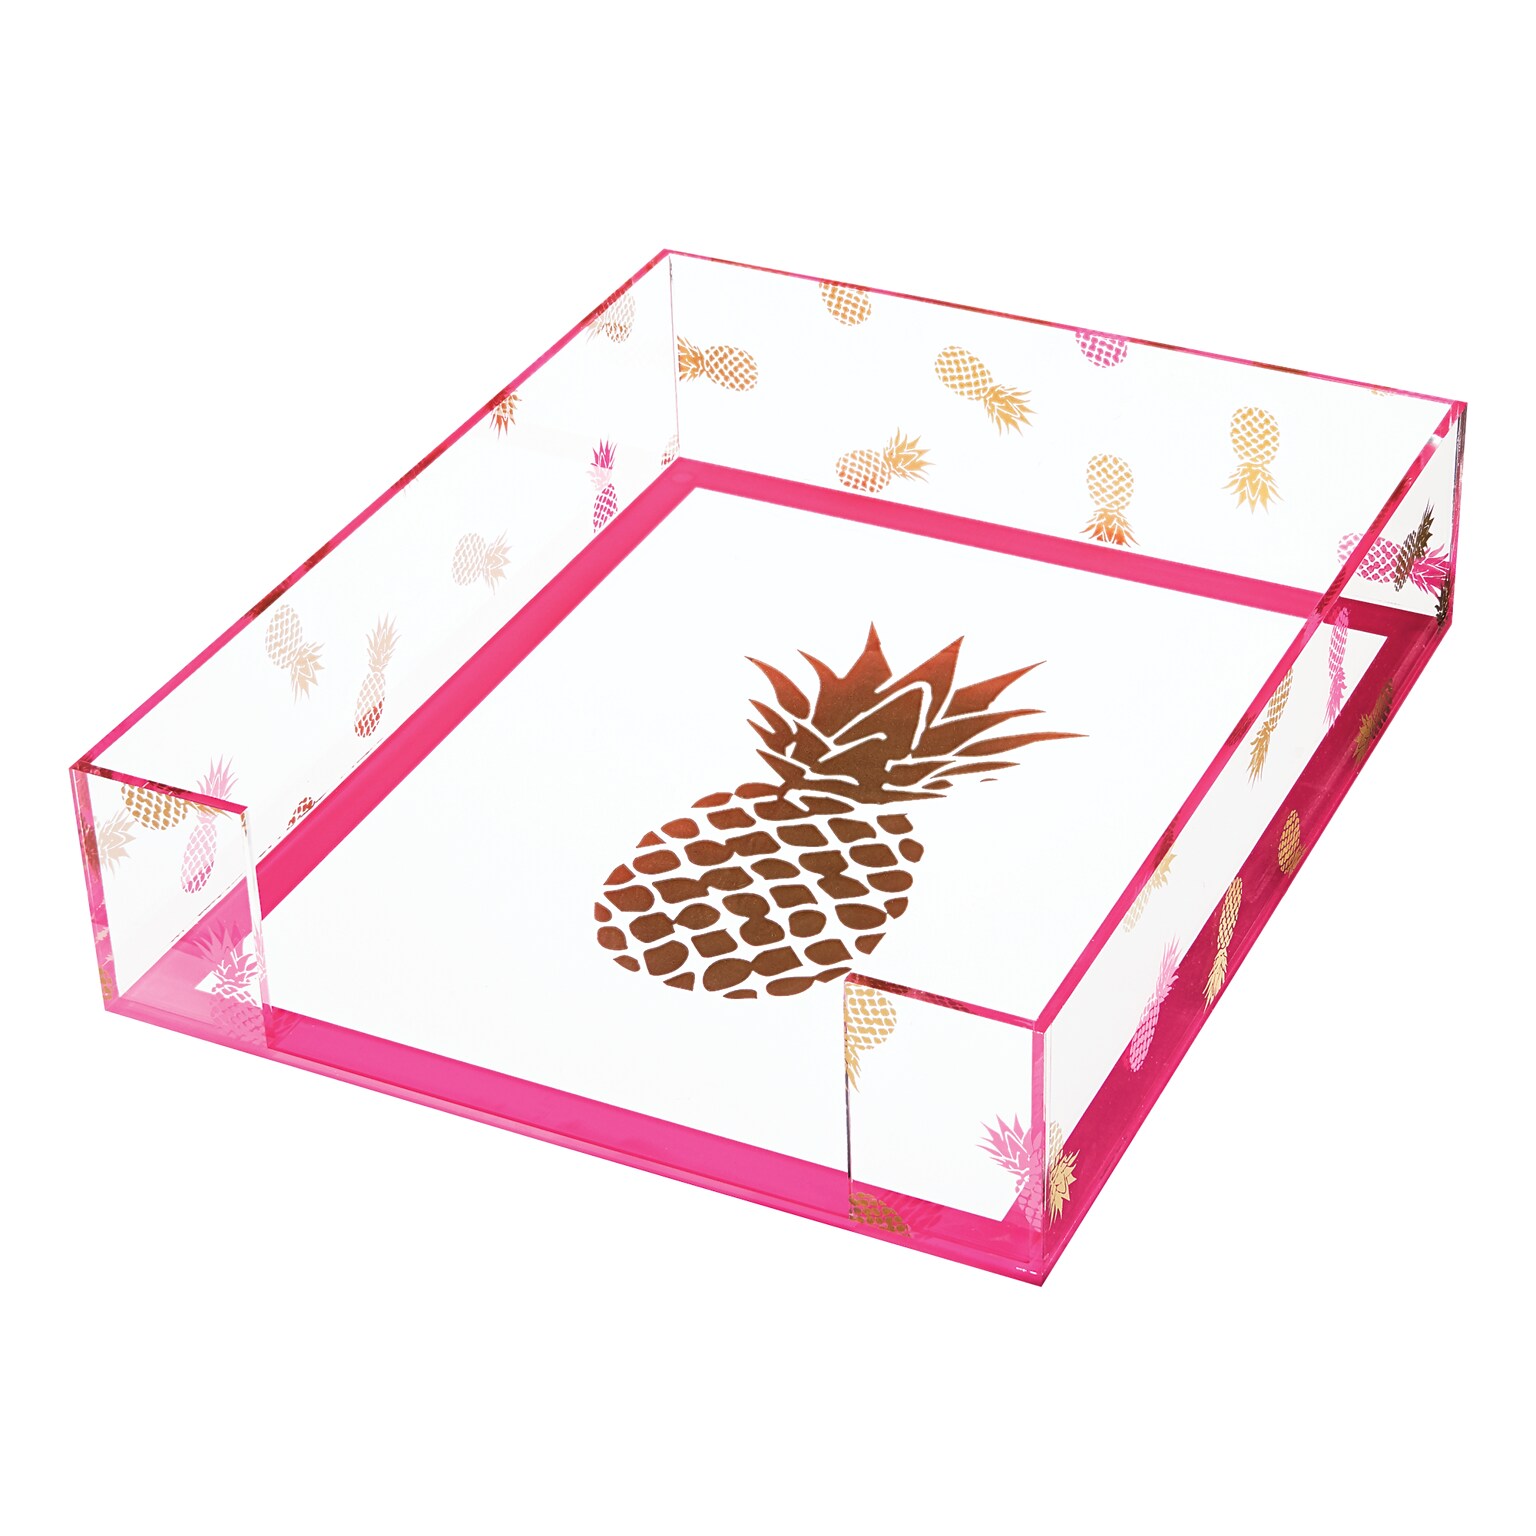 Deflecto® Desklarity™ Letter Tray, Precisely Pineapple, Pink/Metallic Gold, 3 x 10-1/2 x 12-4/5 (DEF-41692)